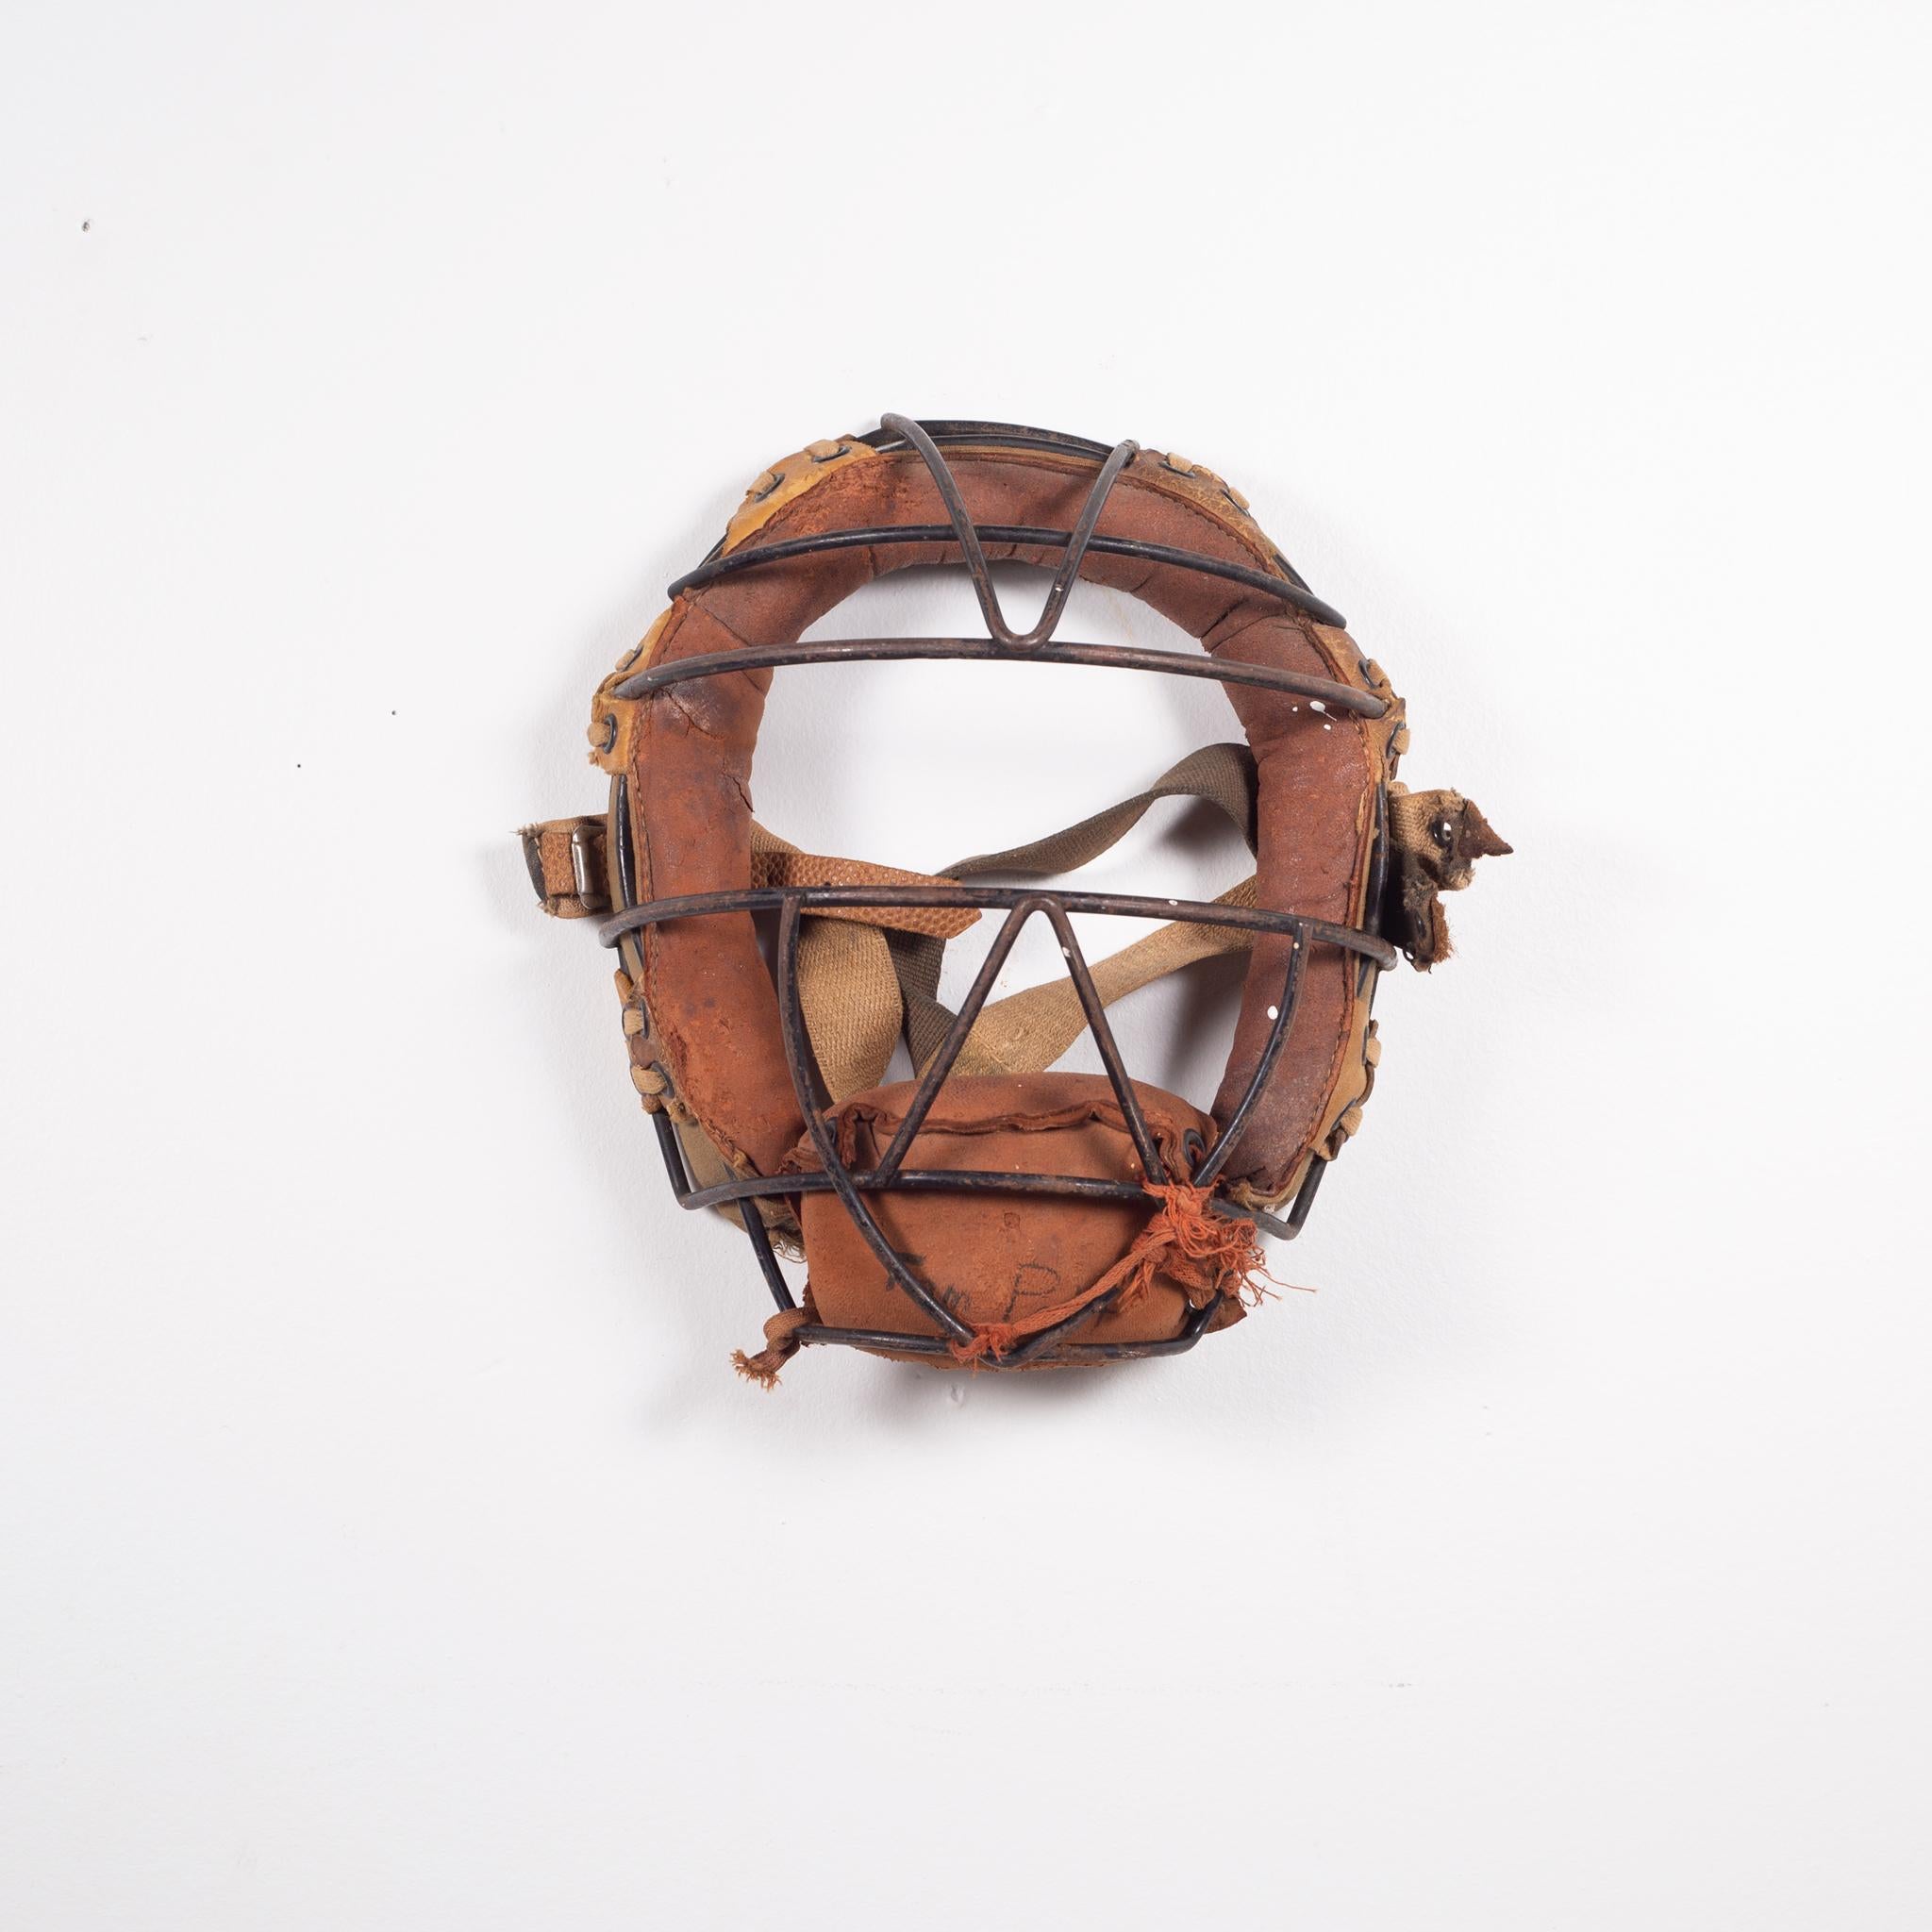 Industrial Early 20th C. Steel and Leather Catcher's Mask c.1930